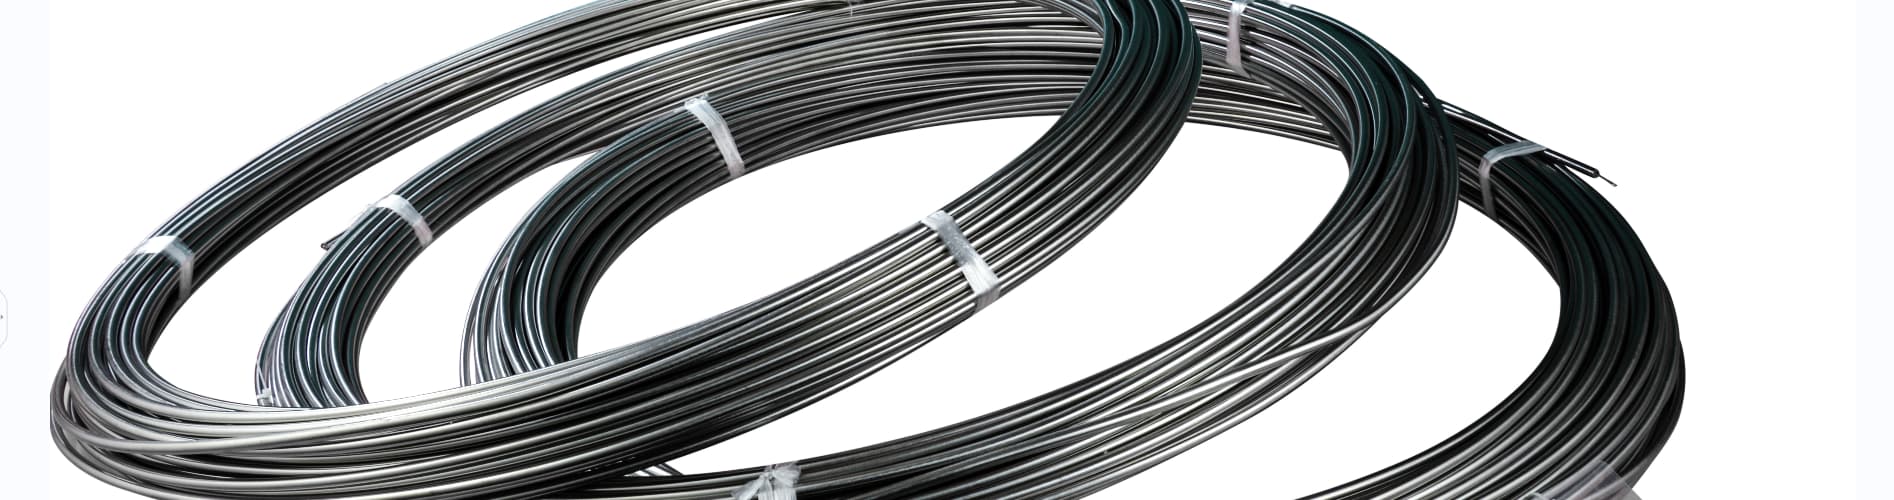 Cable MICC
